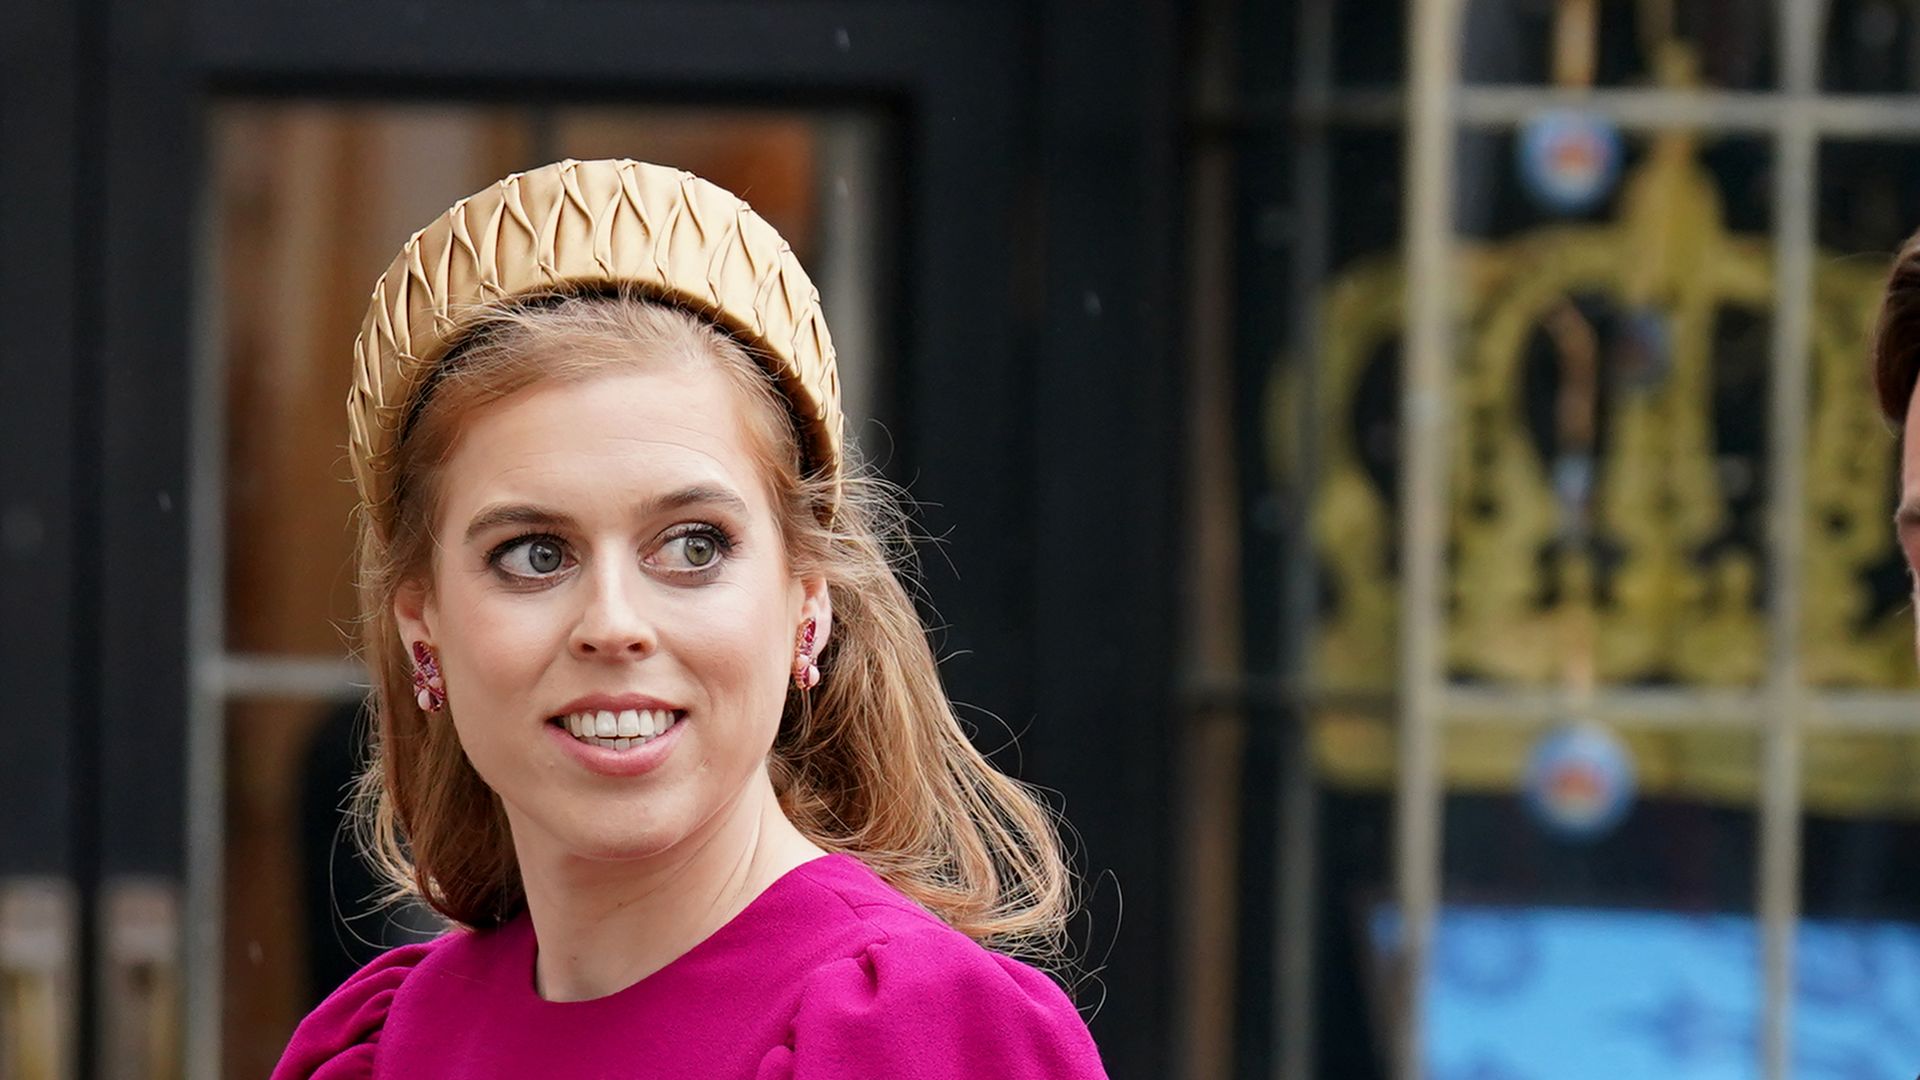 Princess Beatrice stuns in a fushia gown to attend the Coronation of King Charles III 